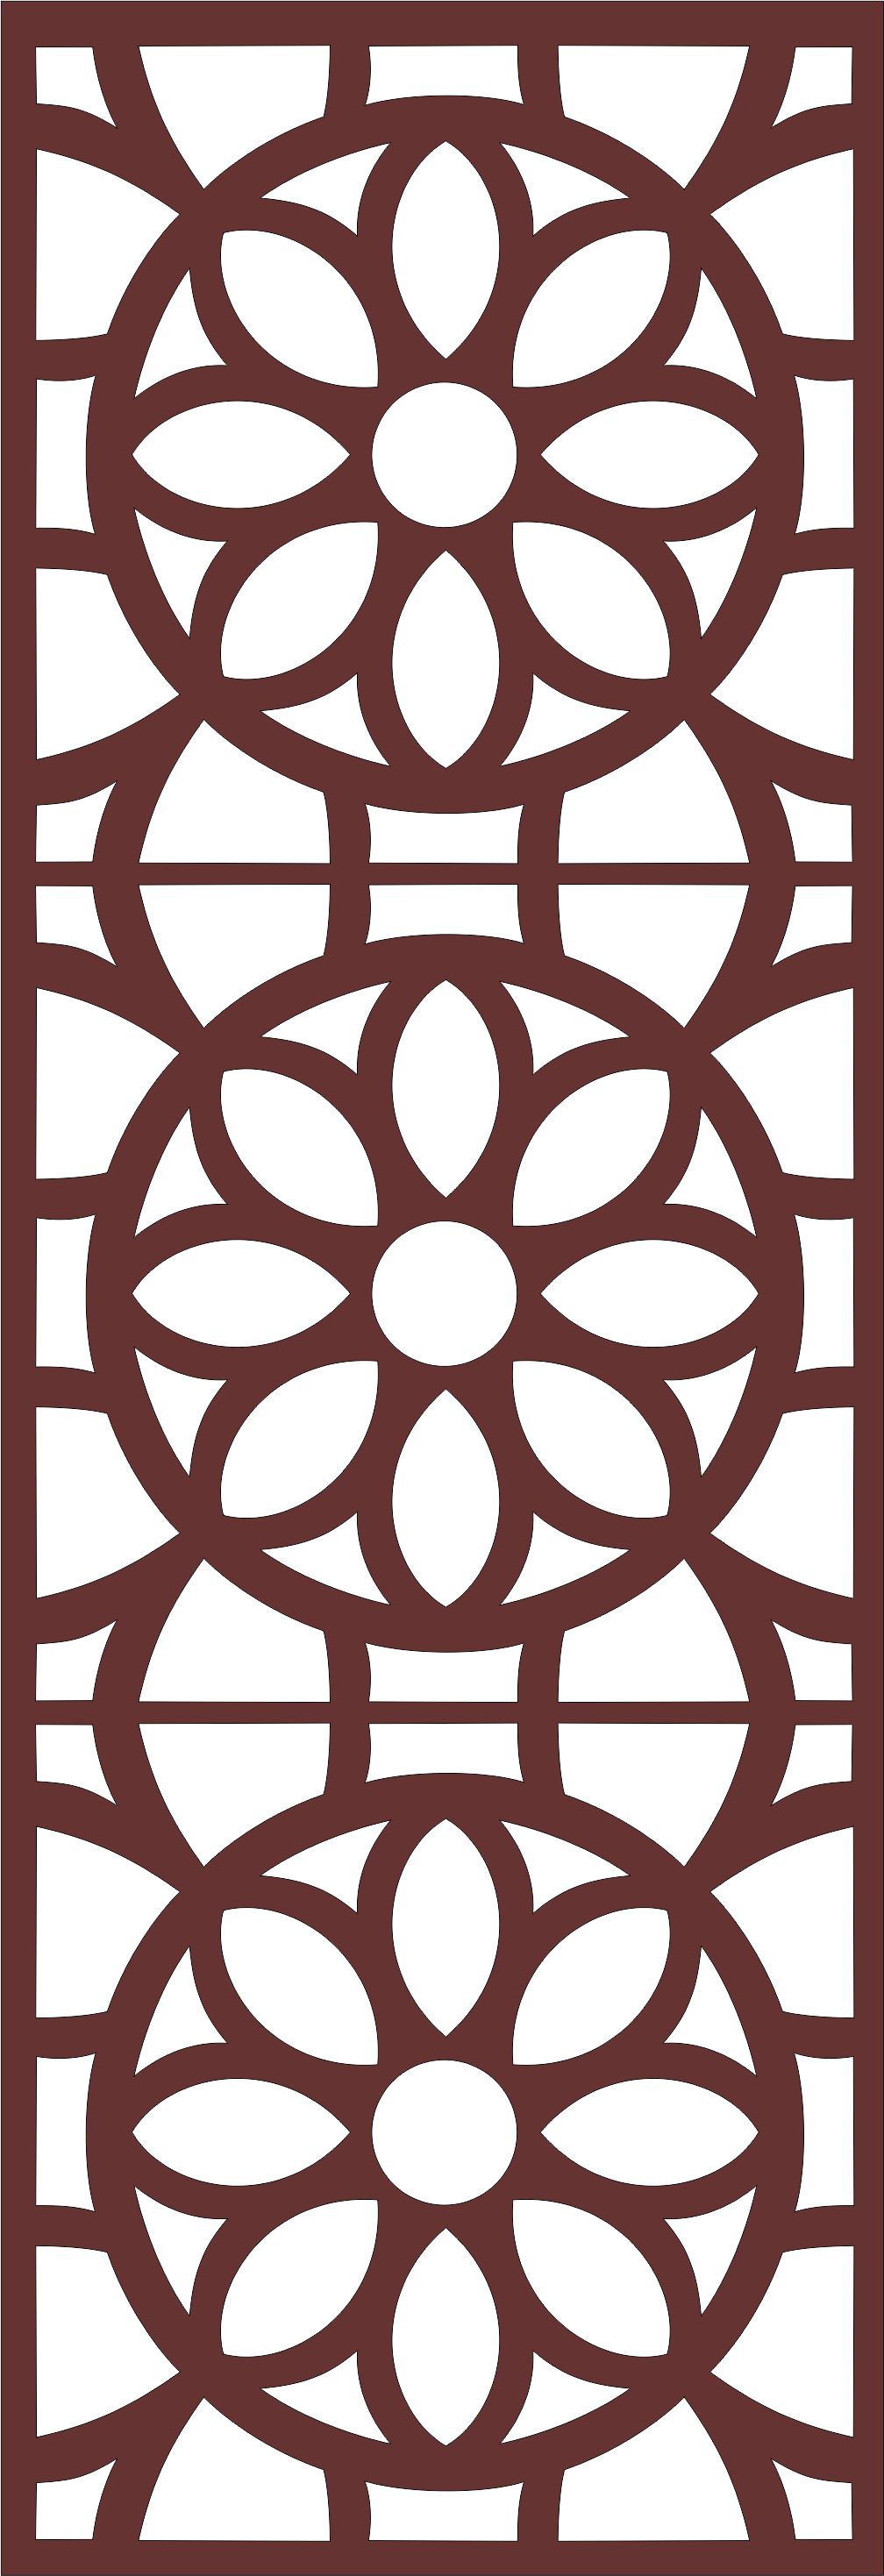 Laser Cut Drawing Room Grill Floral Seamless Design Download Free Vector